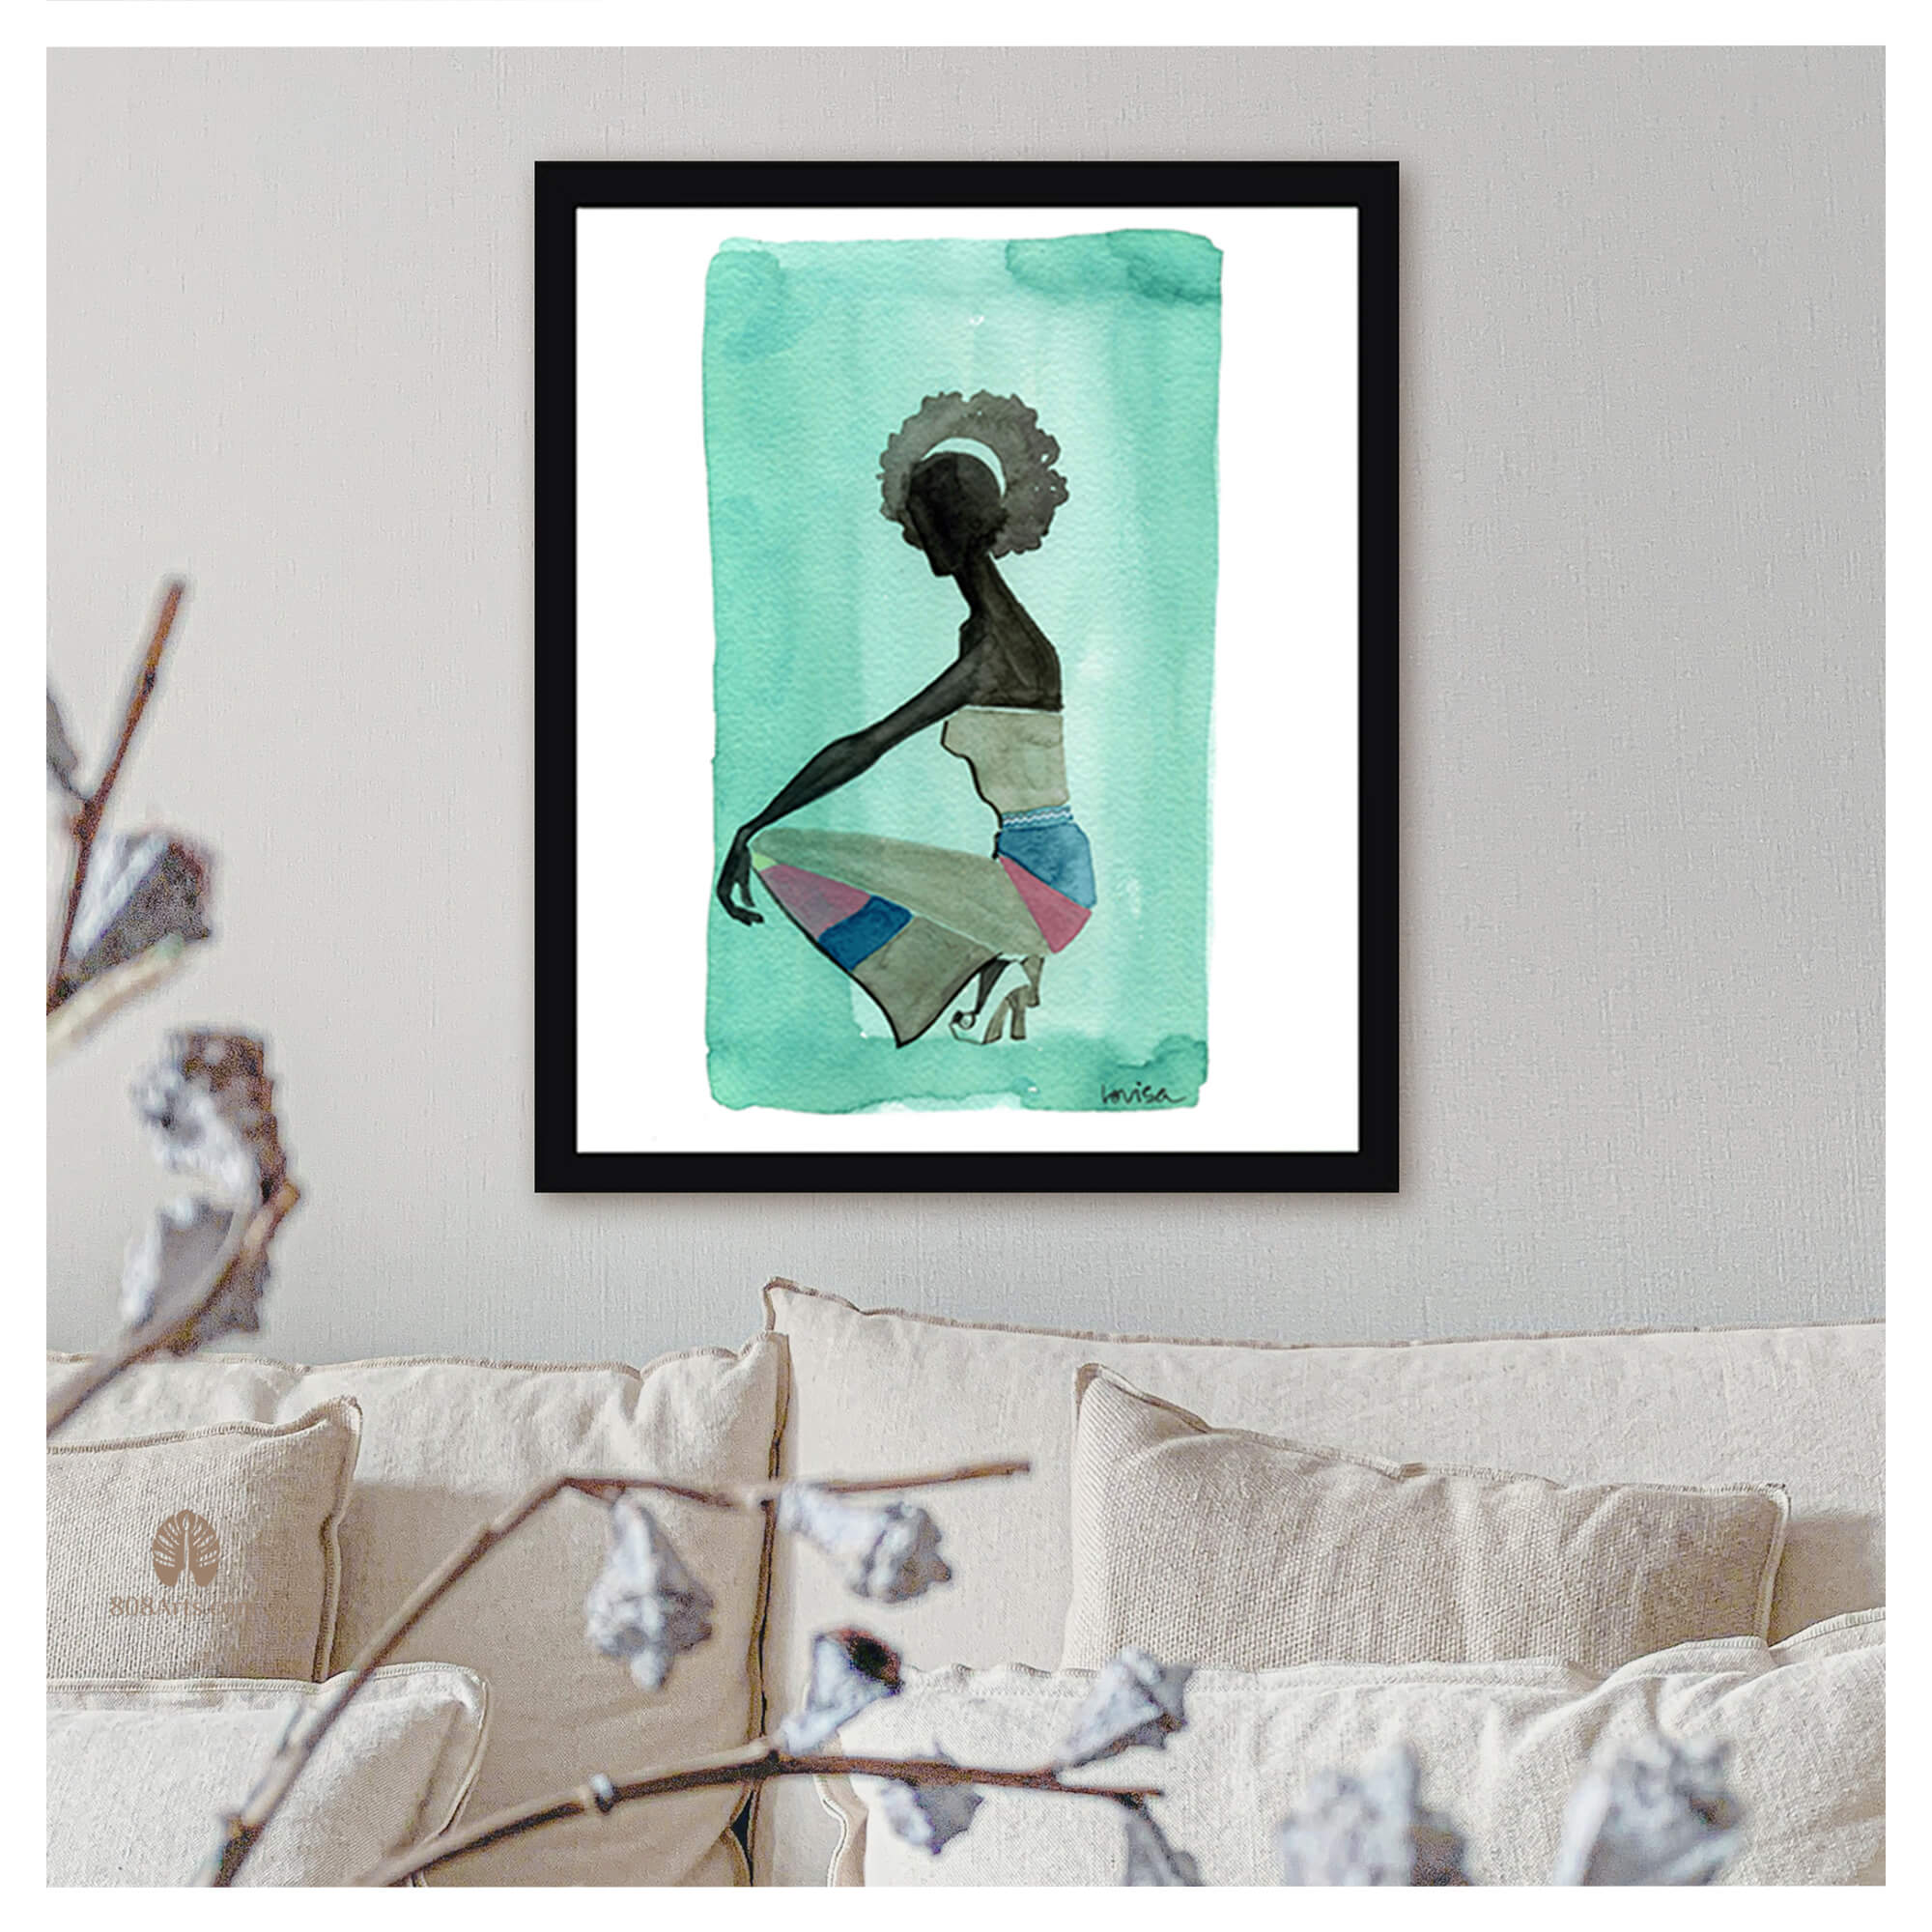 Framed paper giclée print of a watercolor artwork featuring a woman wearing a retro jumpsuit by Hawaii artist Lovisa Oliv